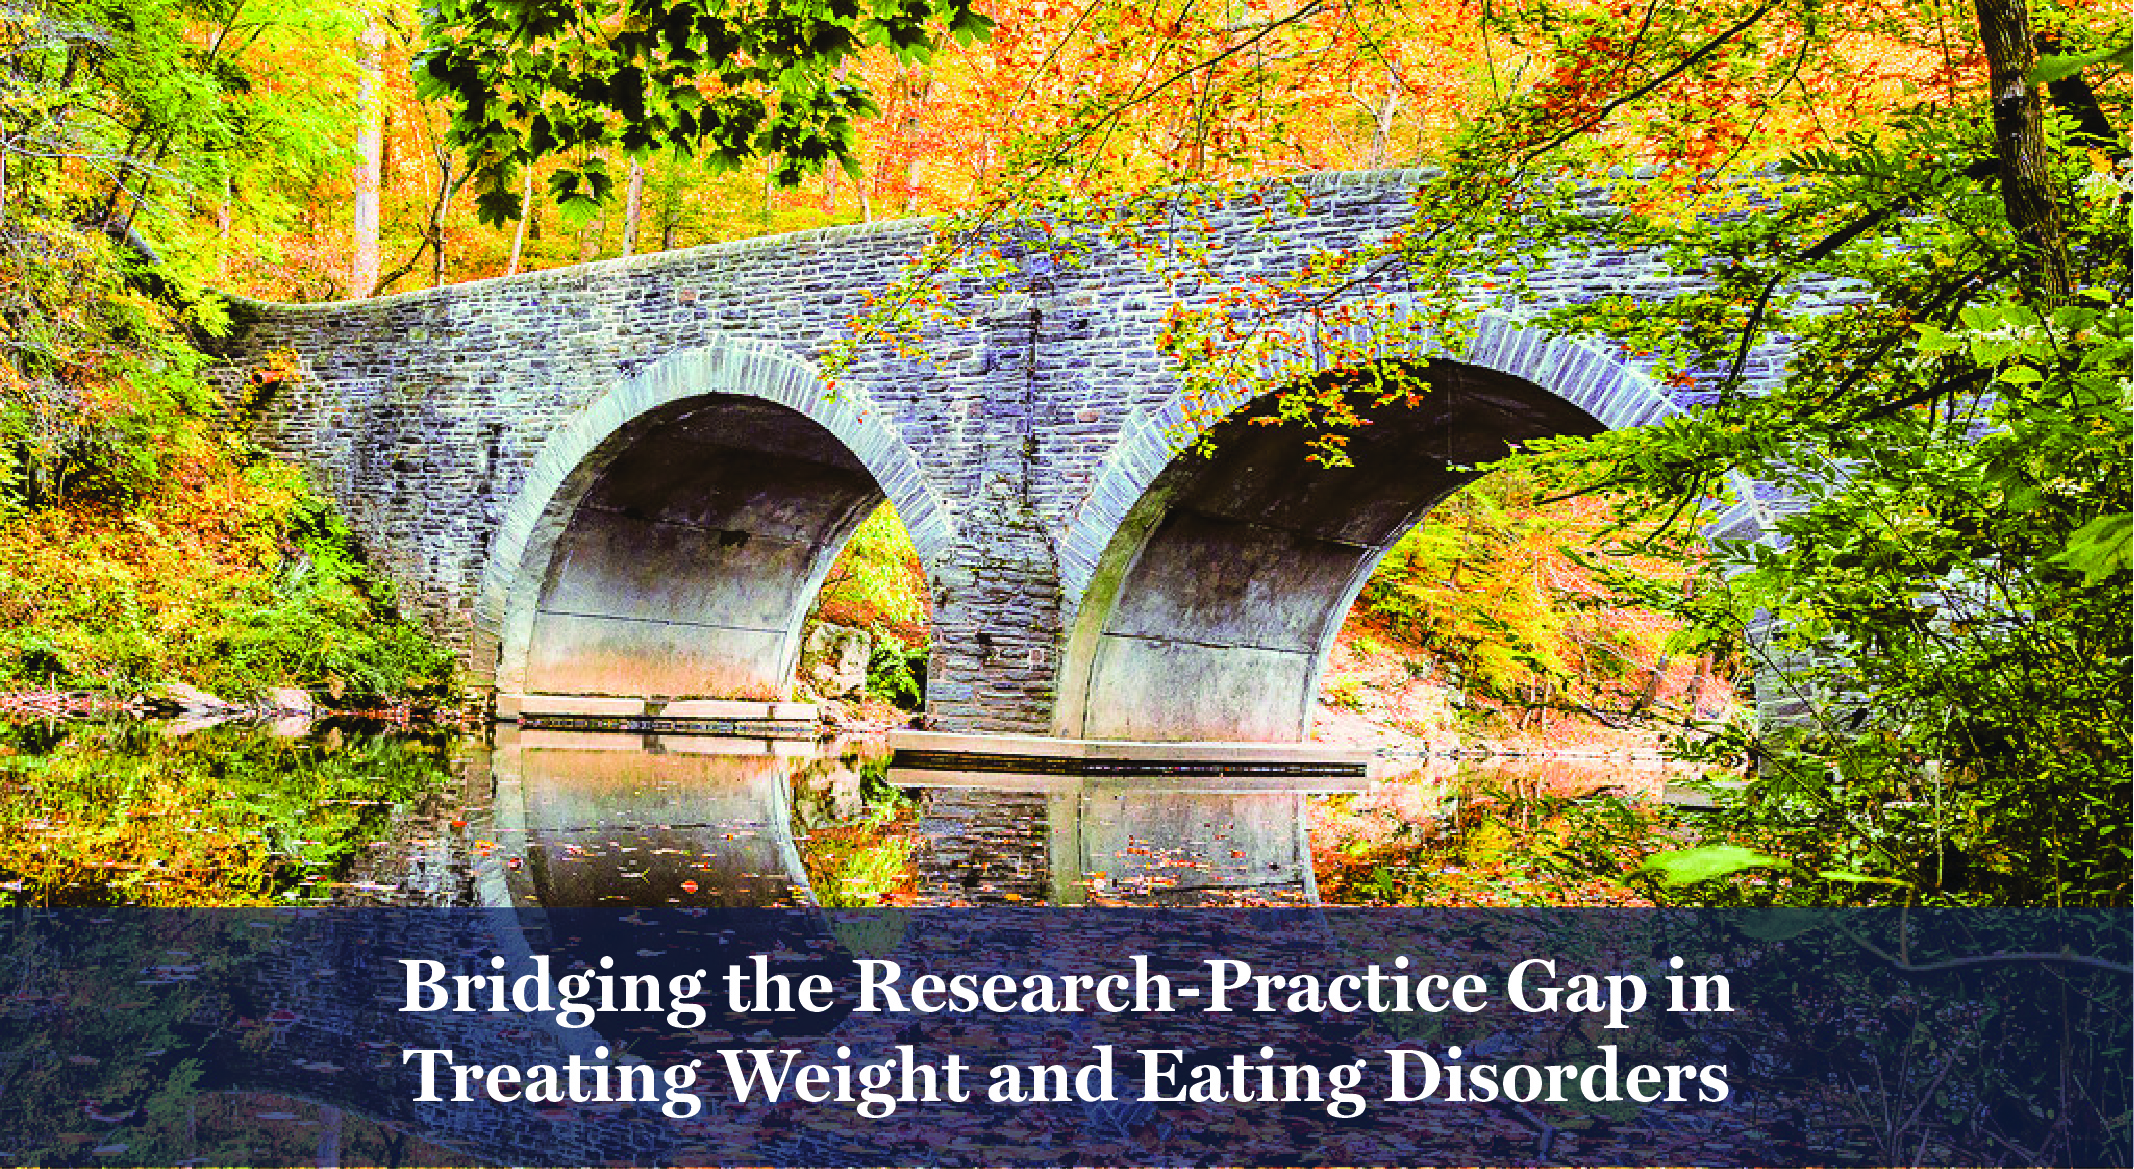 Bridging the Research-Practice Gap in Treating Weight and Eating Disorders